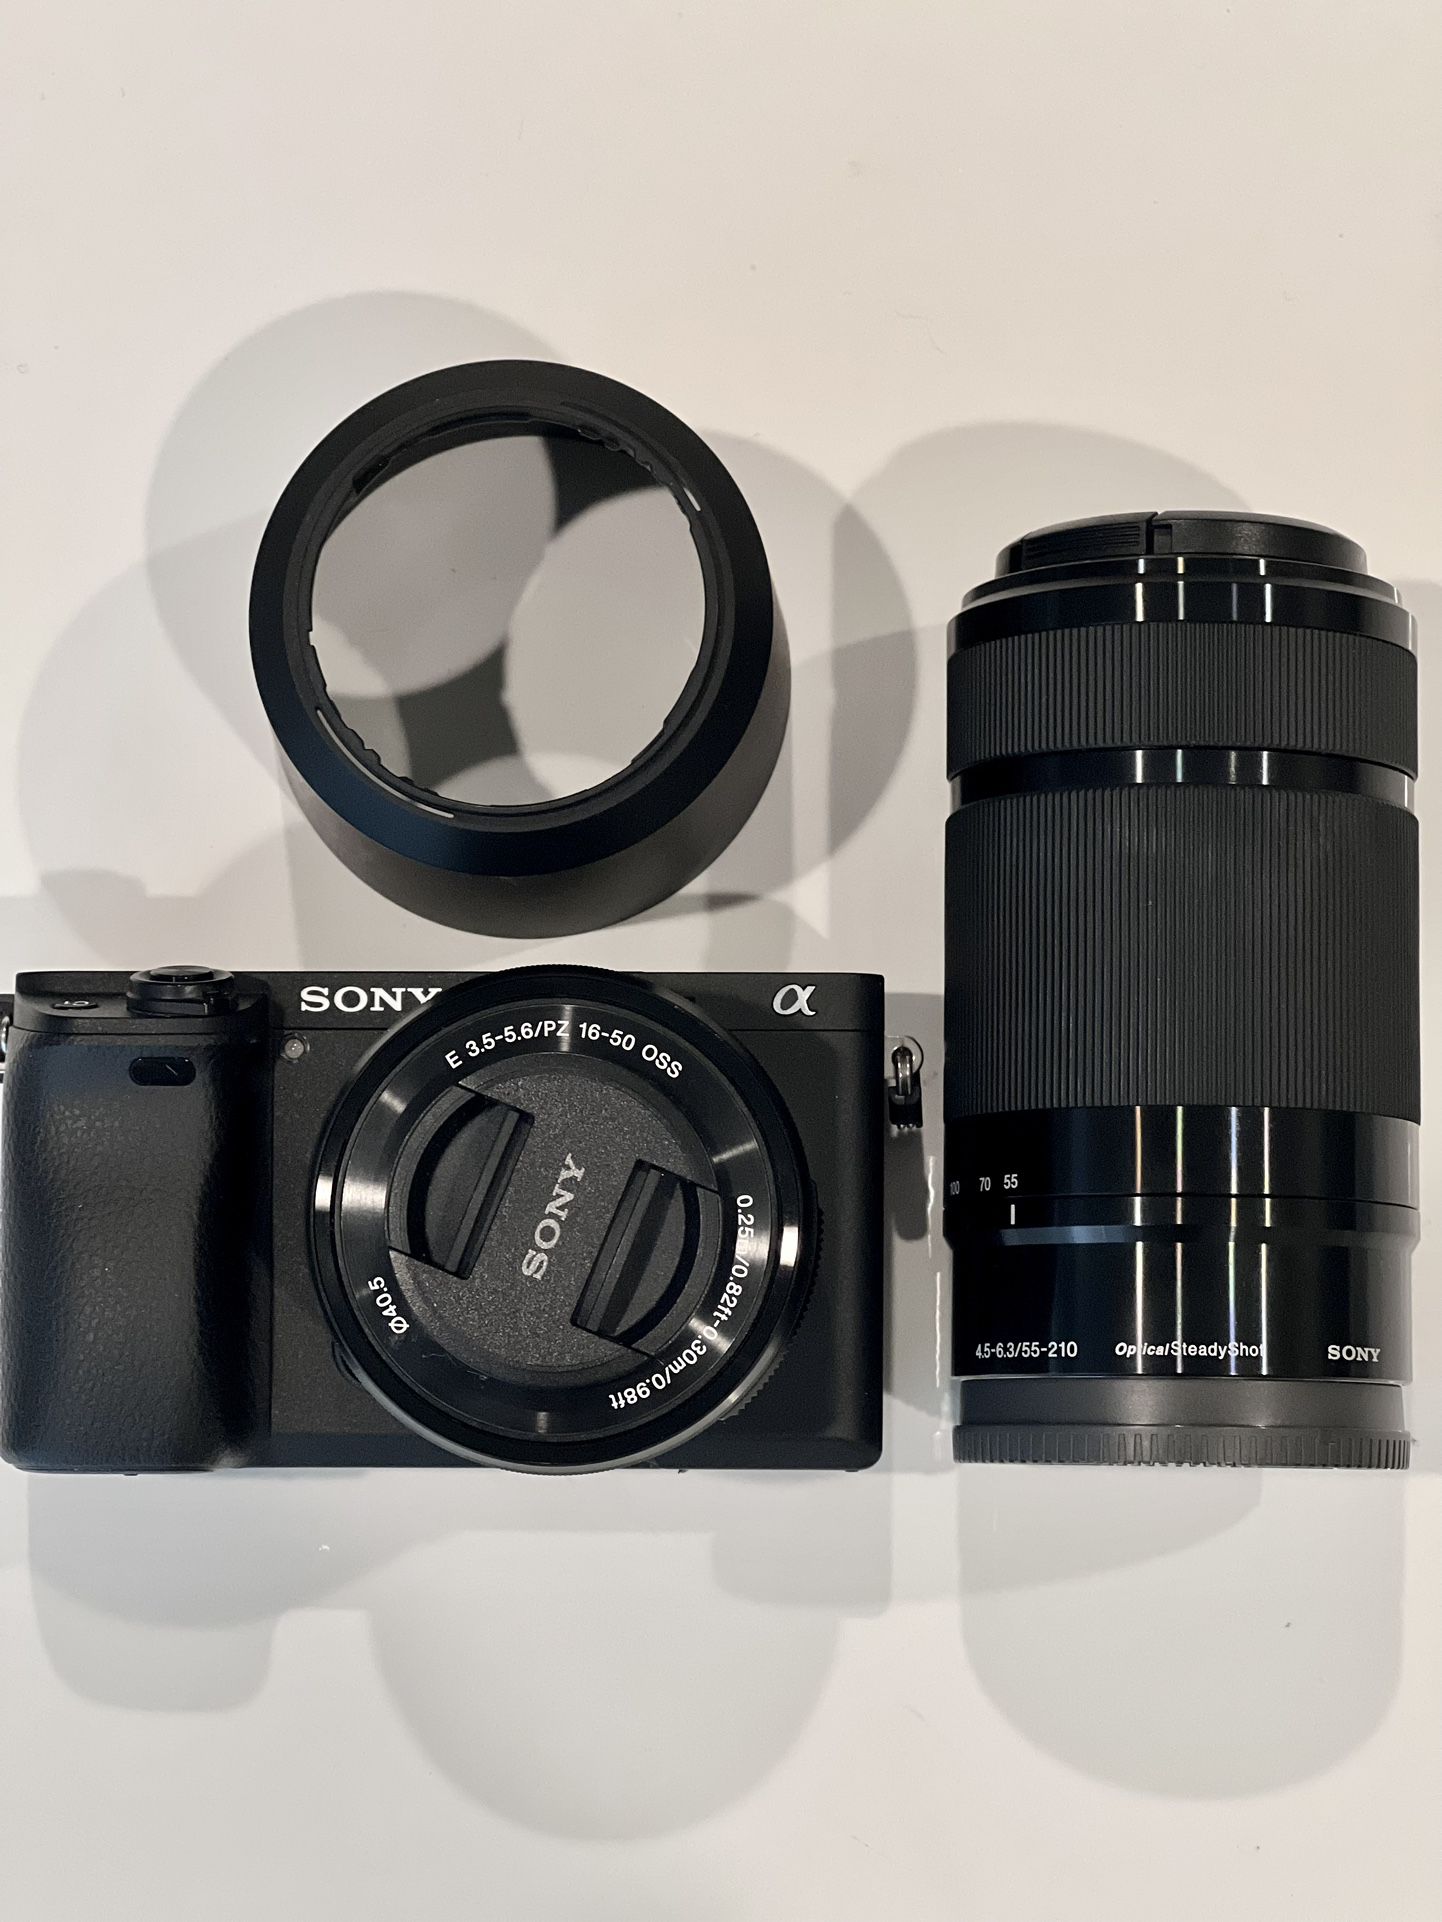 Sony a6300 camera with Sony 16-50mm lens and 50-210mm lens